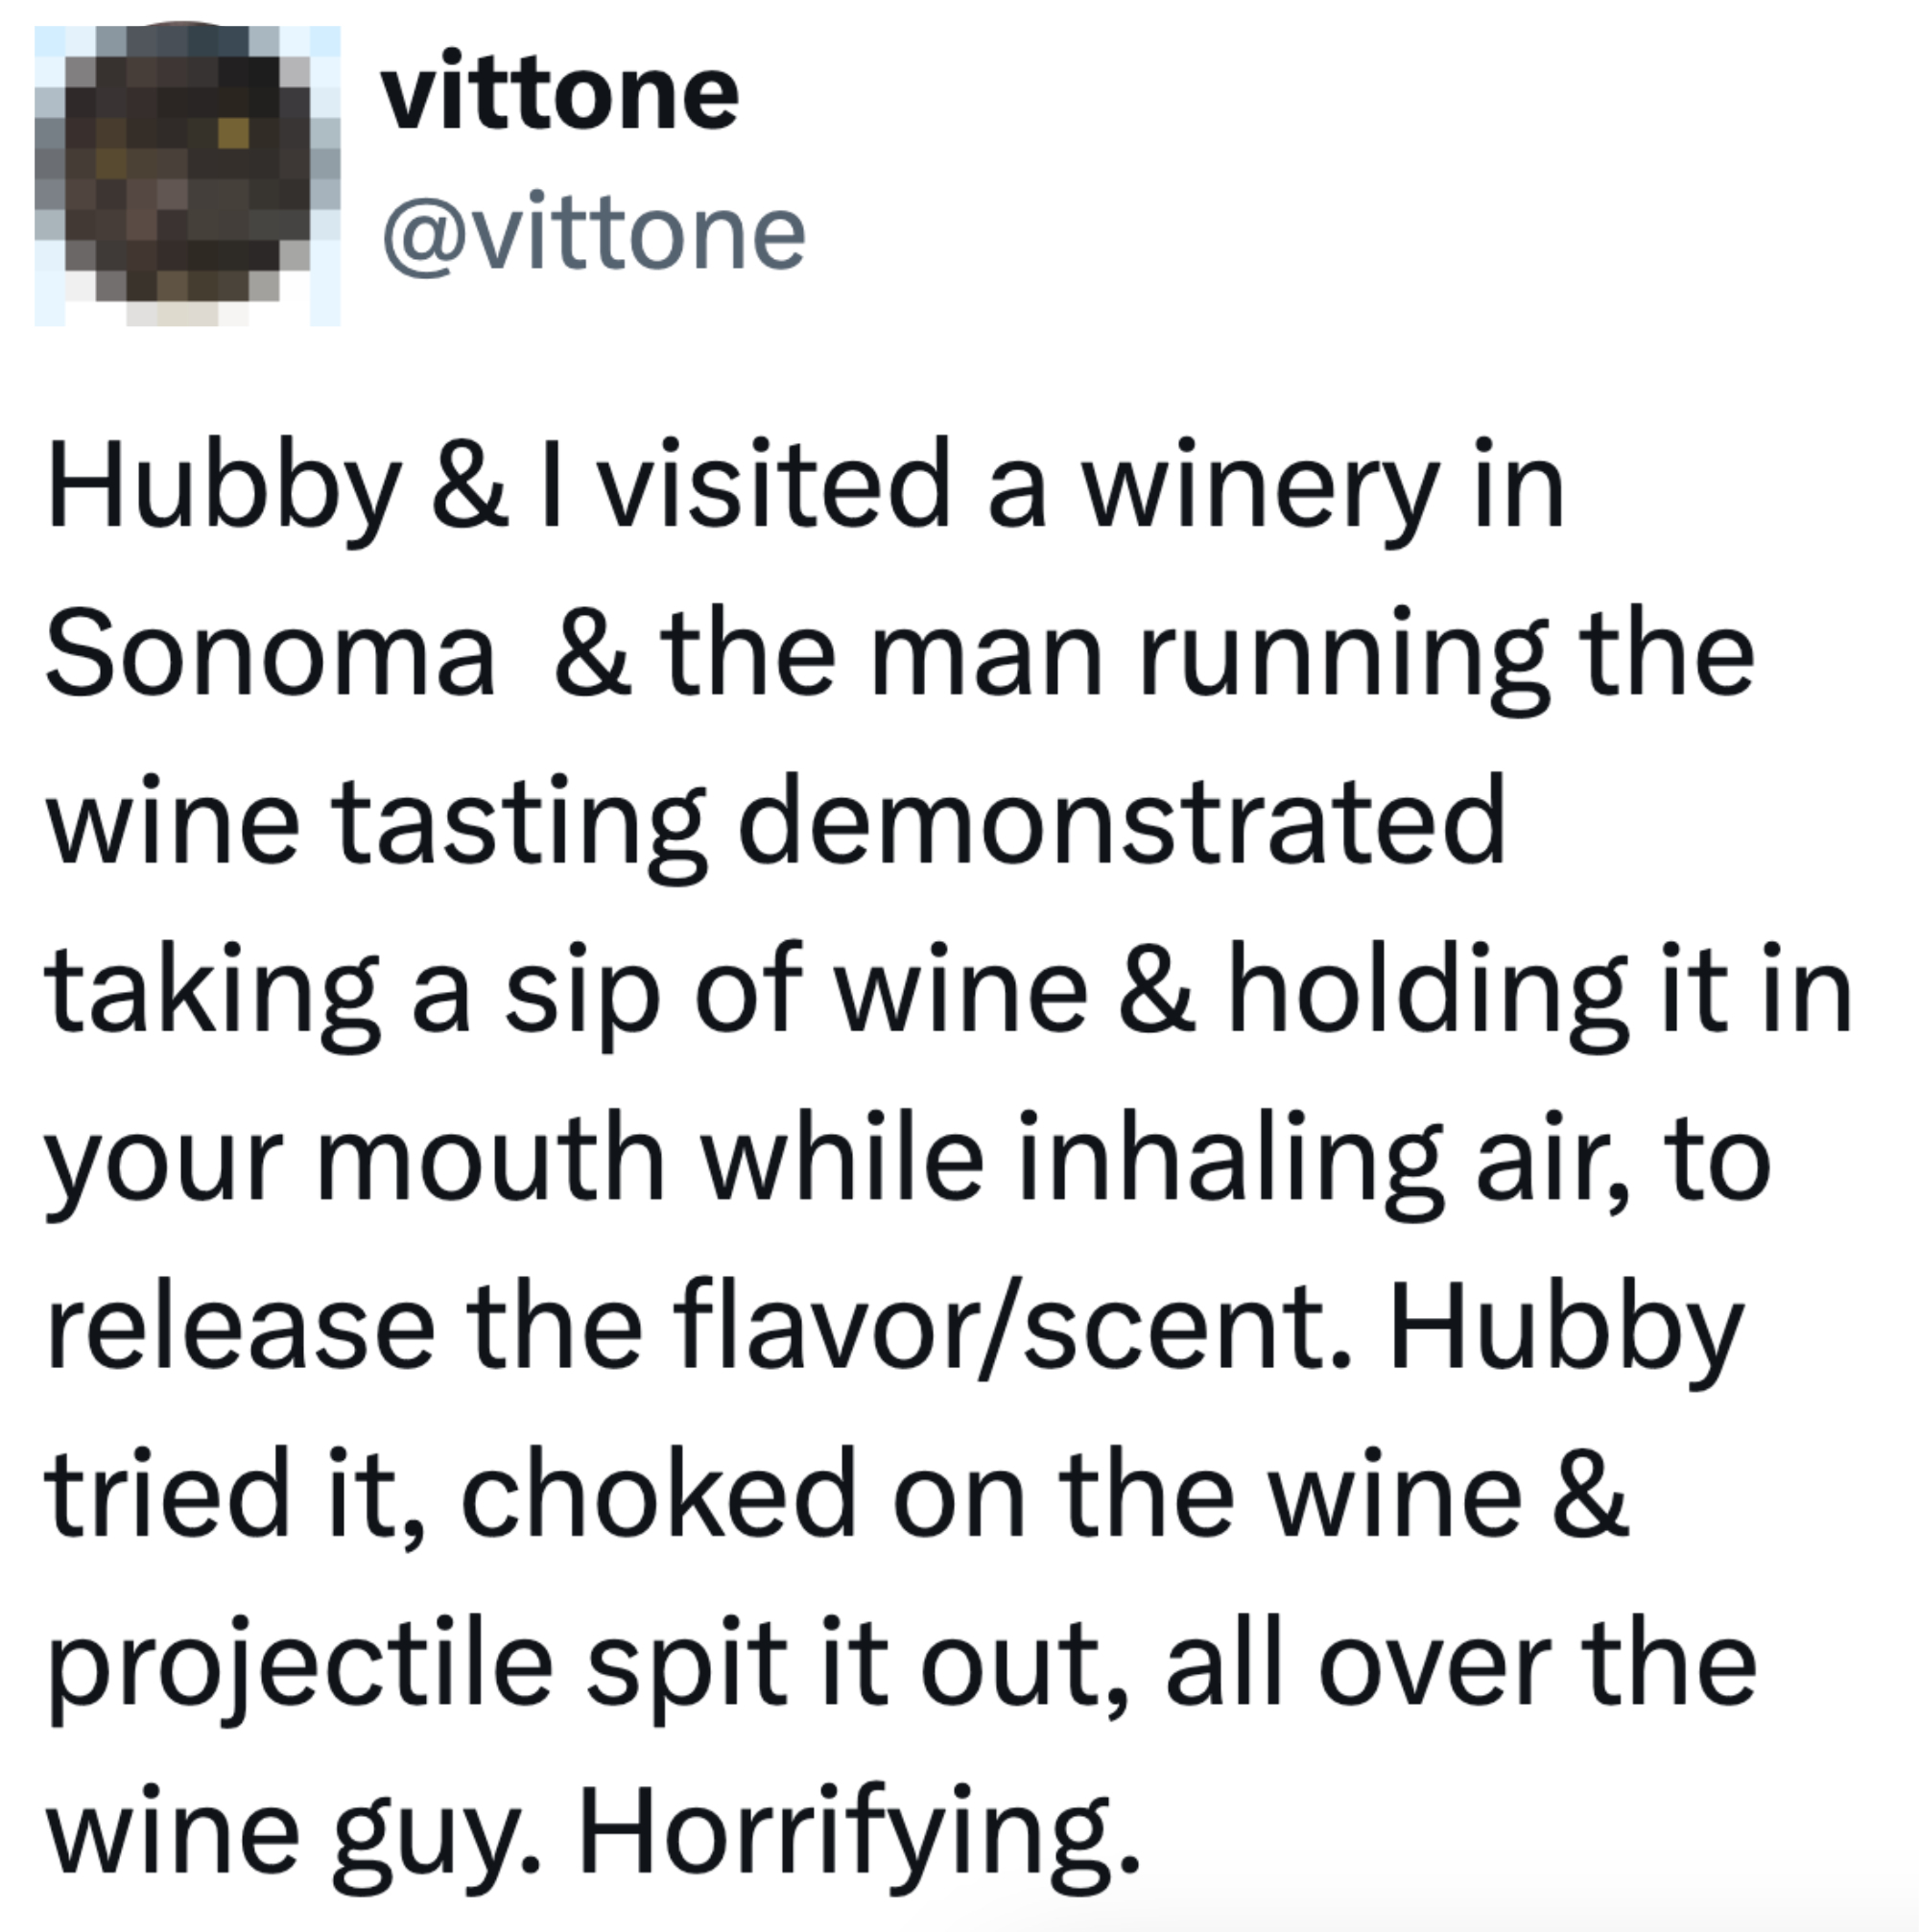 Tweet from a user about a humorous experience at a winery where their spouse attempted wine tasting and choked, finding it horrifying